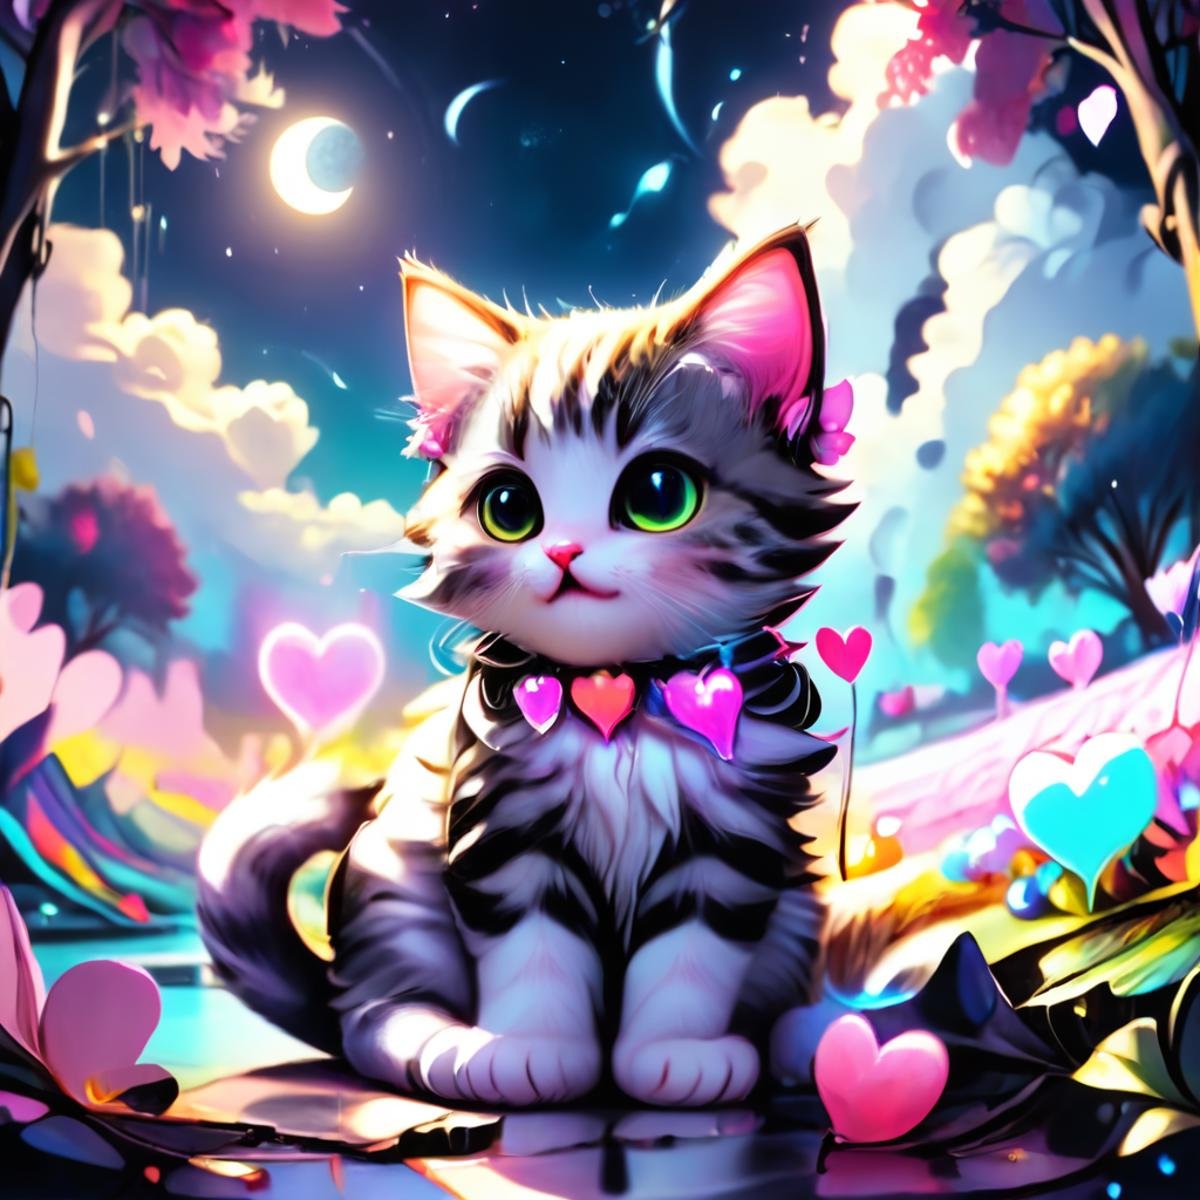 ValentineNatureStyleSDXL,no humans, flowers, water, plant, fantasy, petals, full moon, moon, cloud, colorful, hearts, outdoors, Darling, cute cat animal, sunlight, crescent moon, <lora:ValentineNatureStyleSDXL:1> <lora:add-detail-xl:0.8>, <lora:Contained_Color_SDXL:0.8> Contained Color